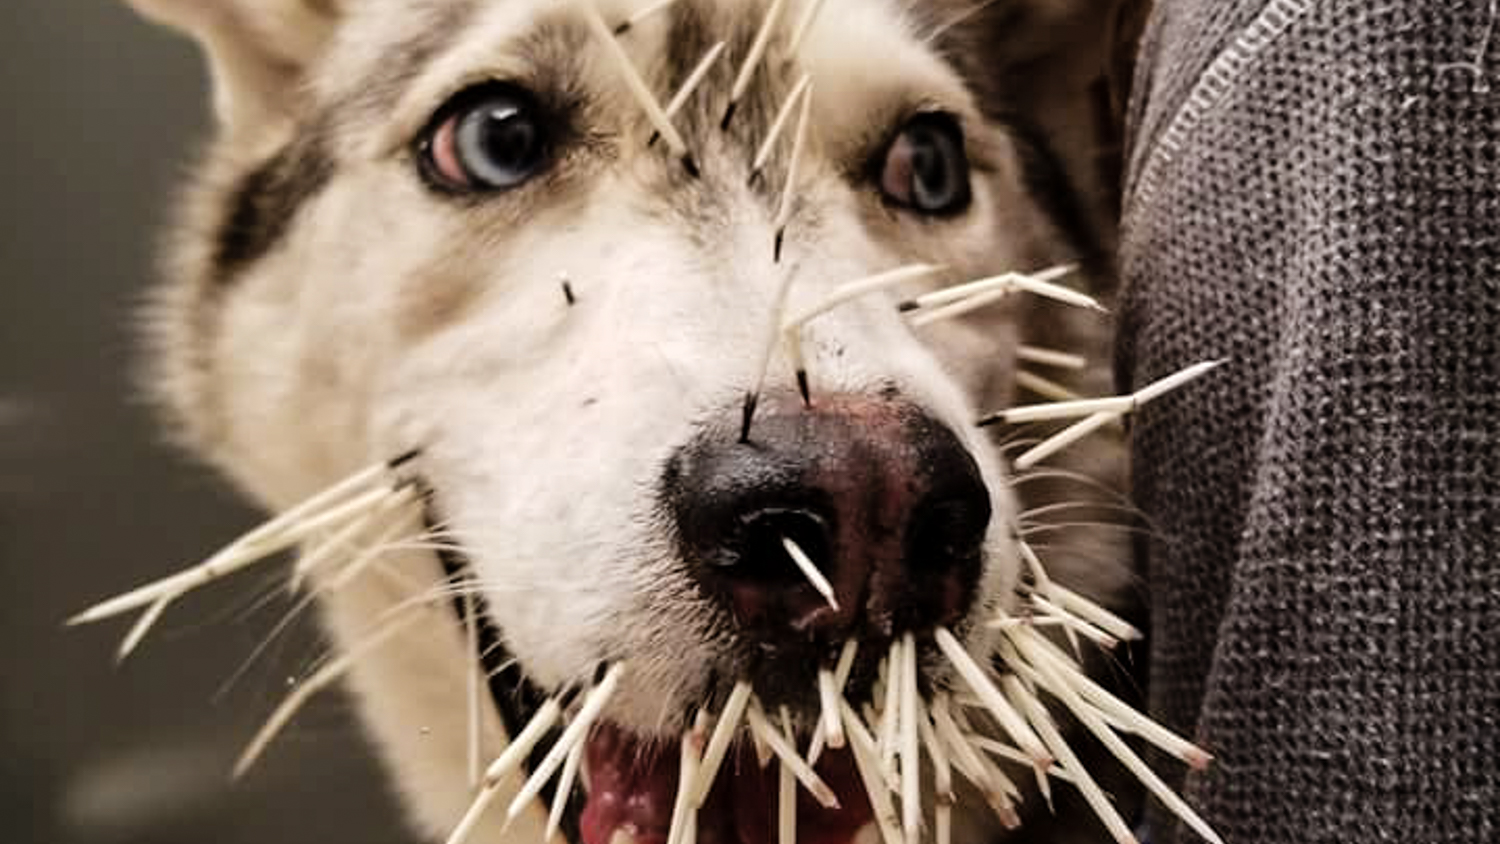 Jaya the dog with a face full of porcupine quills